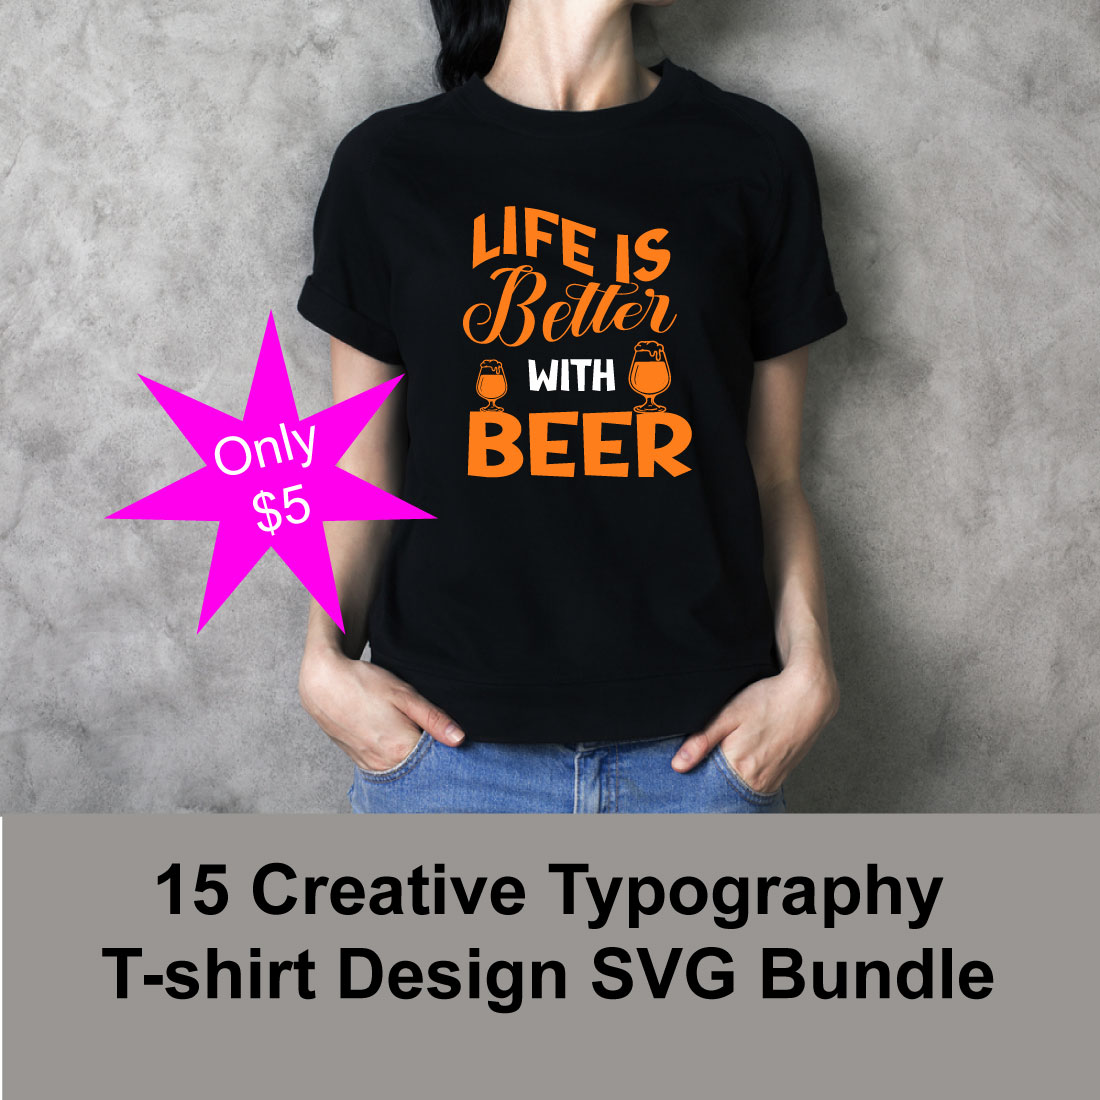 Creative Typography T-shirt Design Quotes SVG cover image.